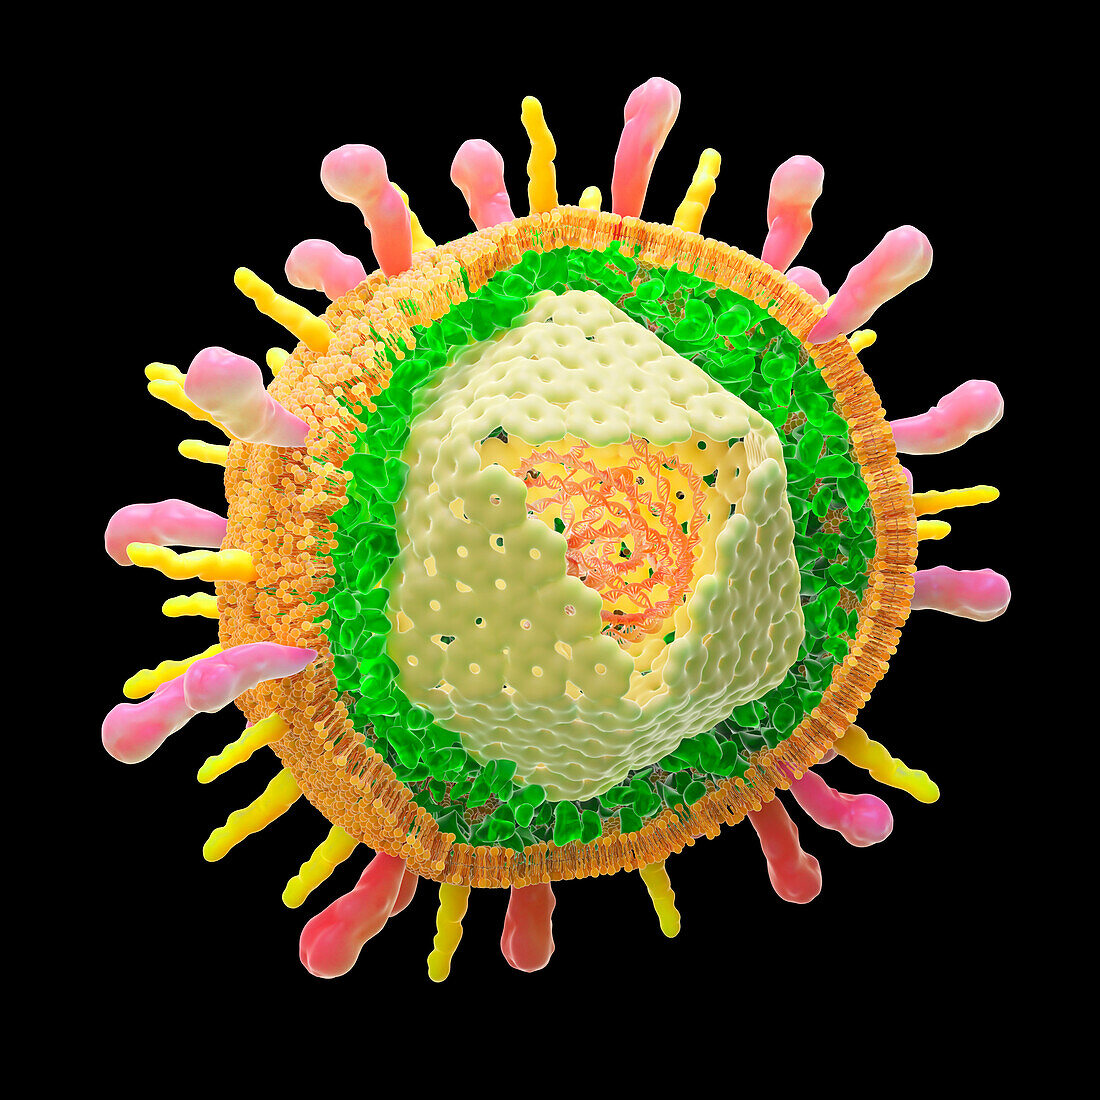 Varicella zoster virus particle, illustration